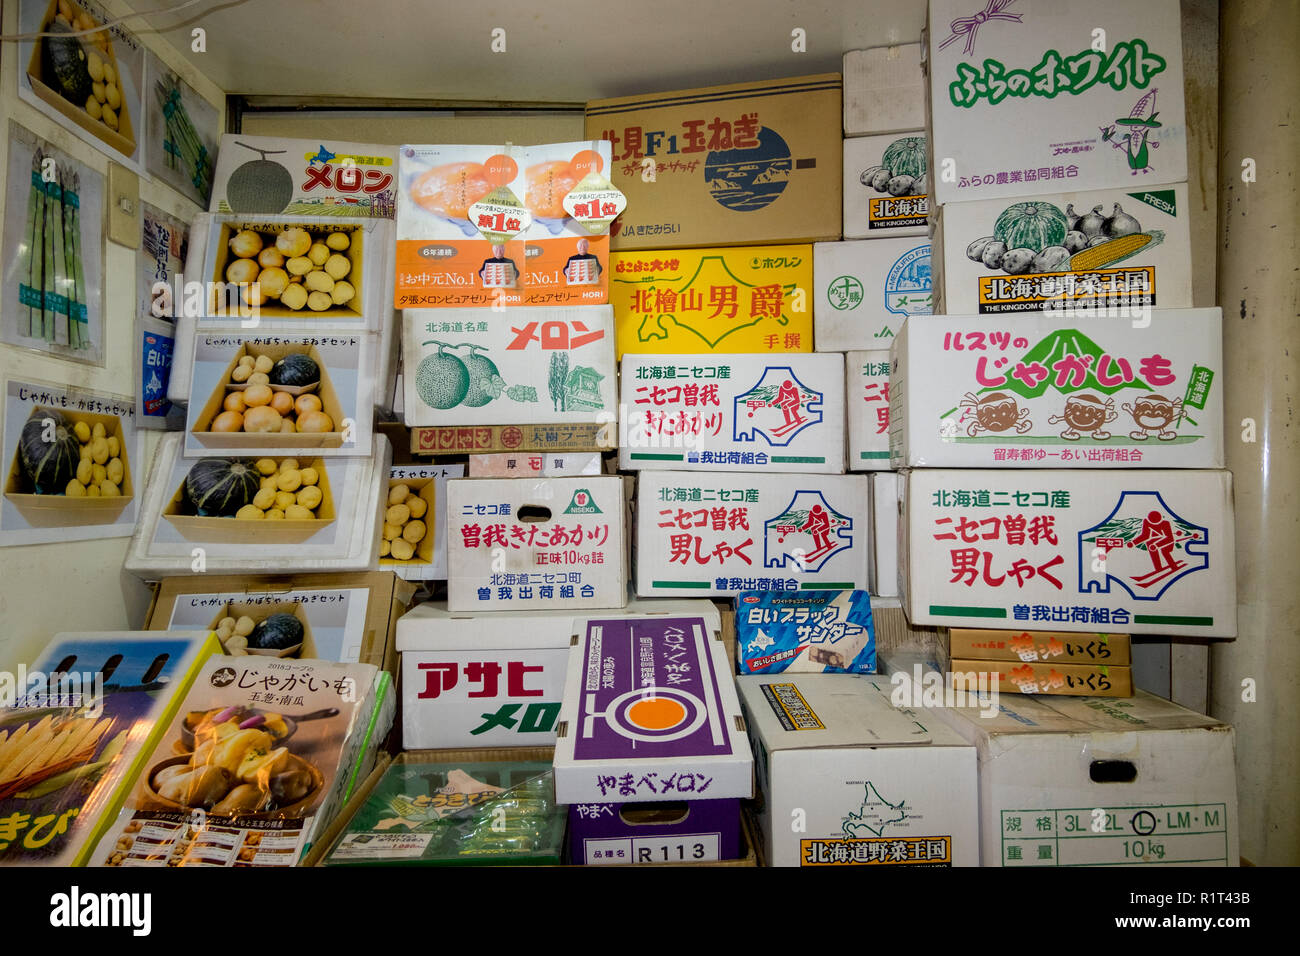 At the Nijo fish market in Sapporo Japan. Colorful vegetable boxes. Stock Photo